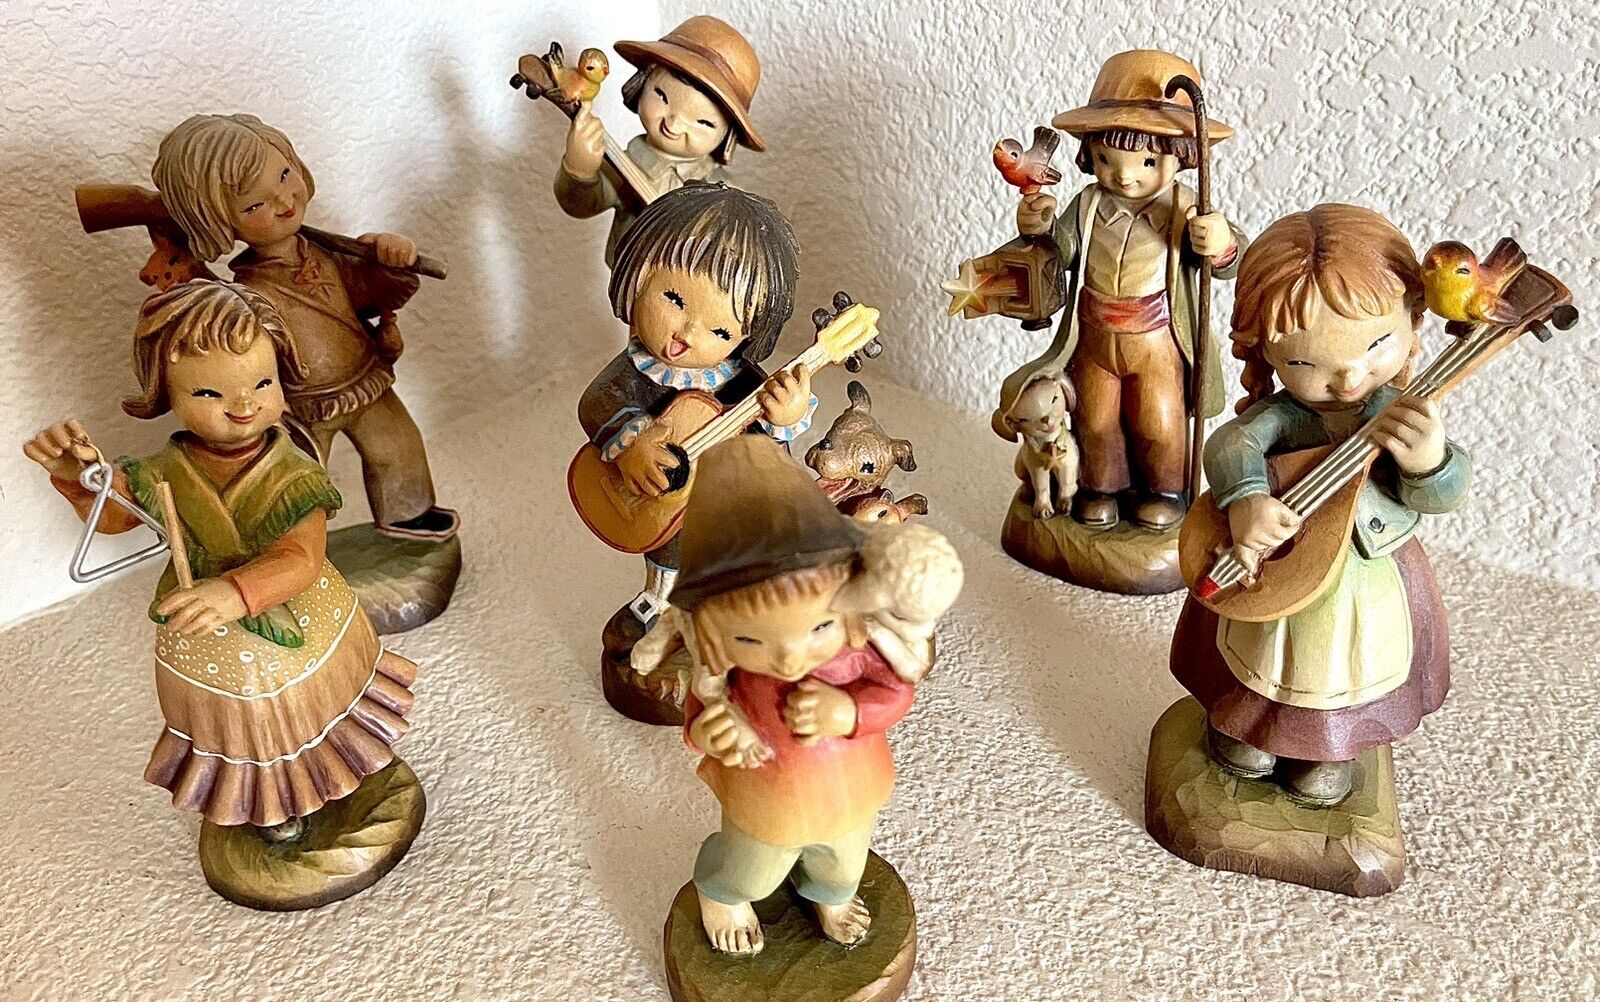 Lot 7 Vintage Large Figurines 6 Inch ANRI Fernandez Italy Wood Collection